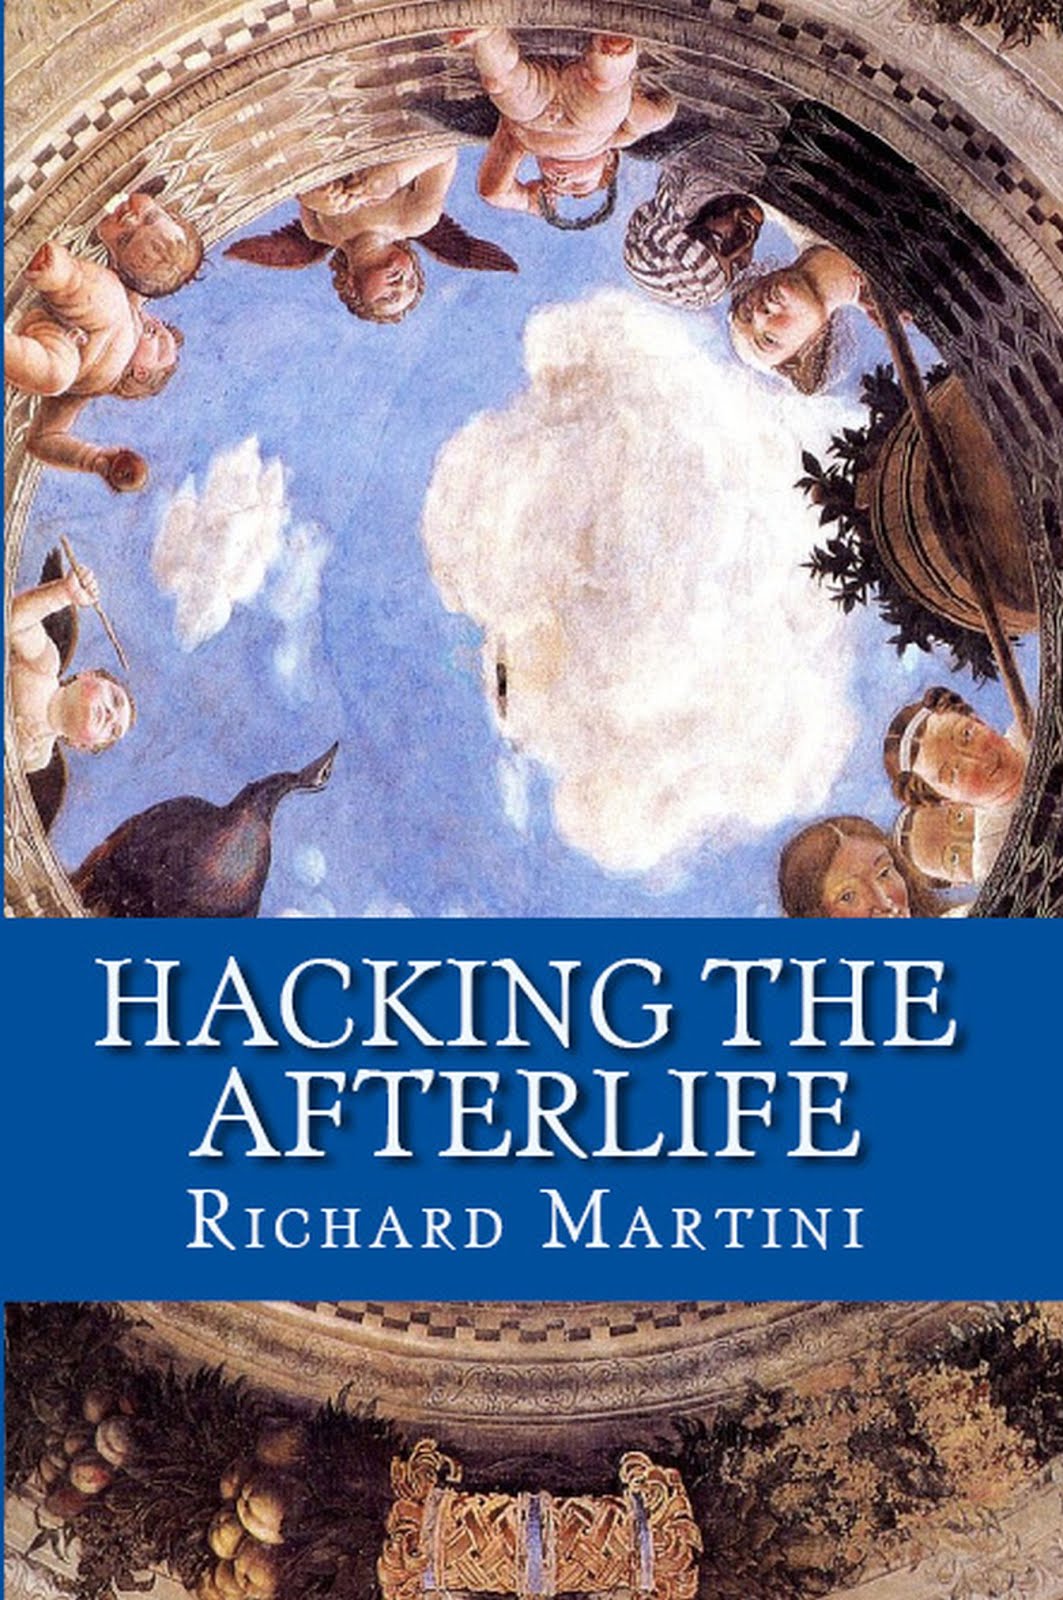 "Hacking the Afterlife"